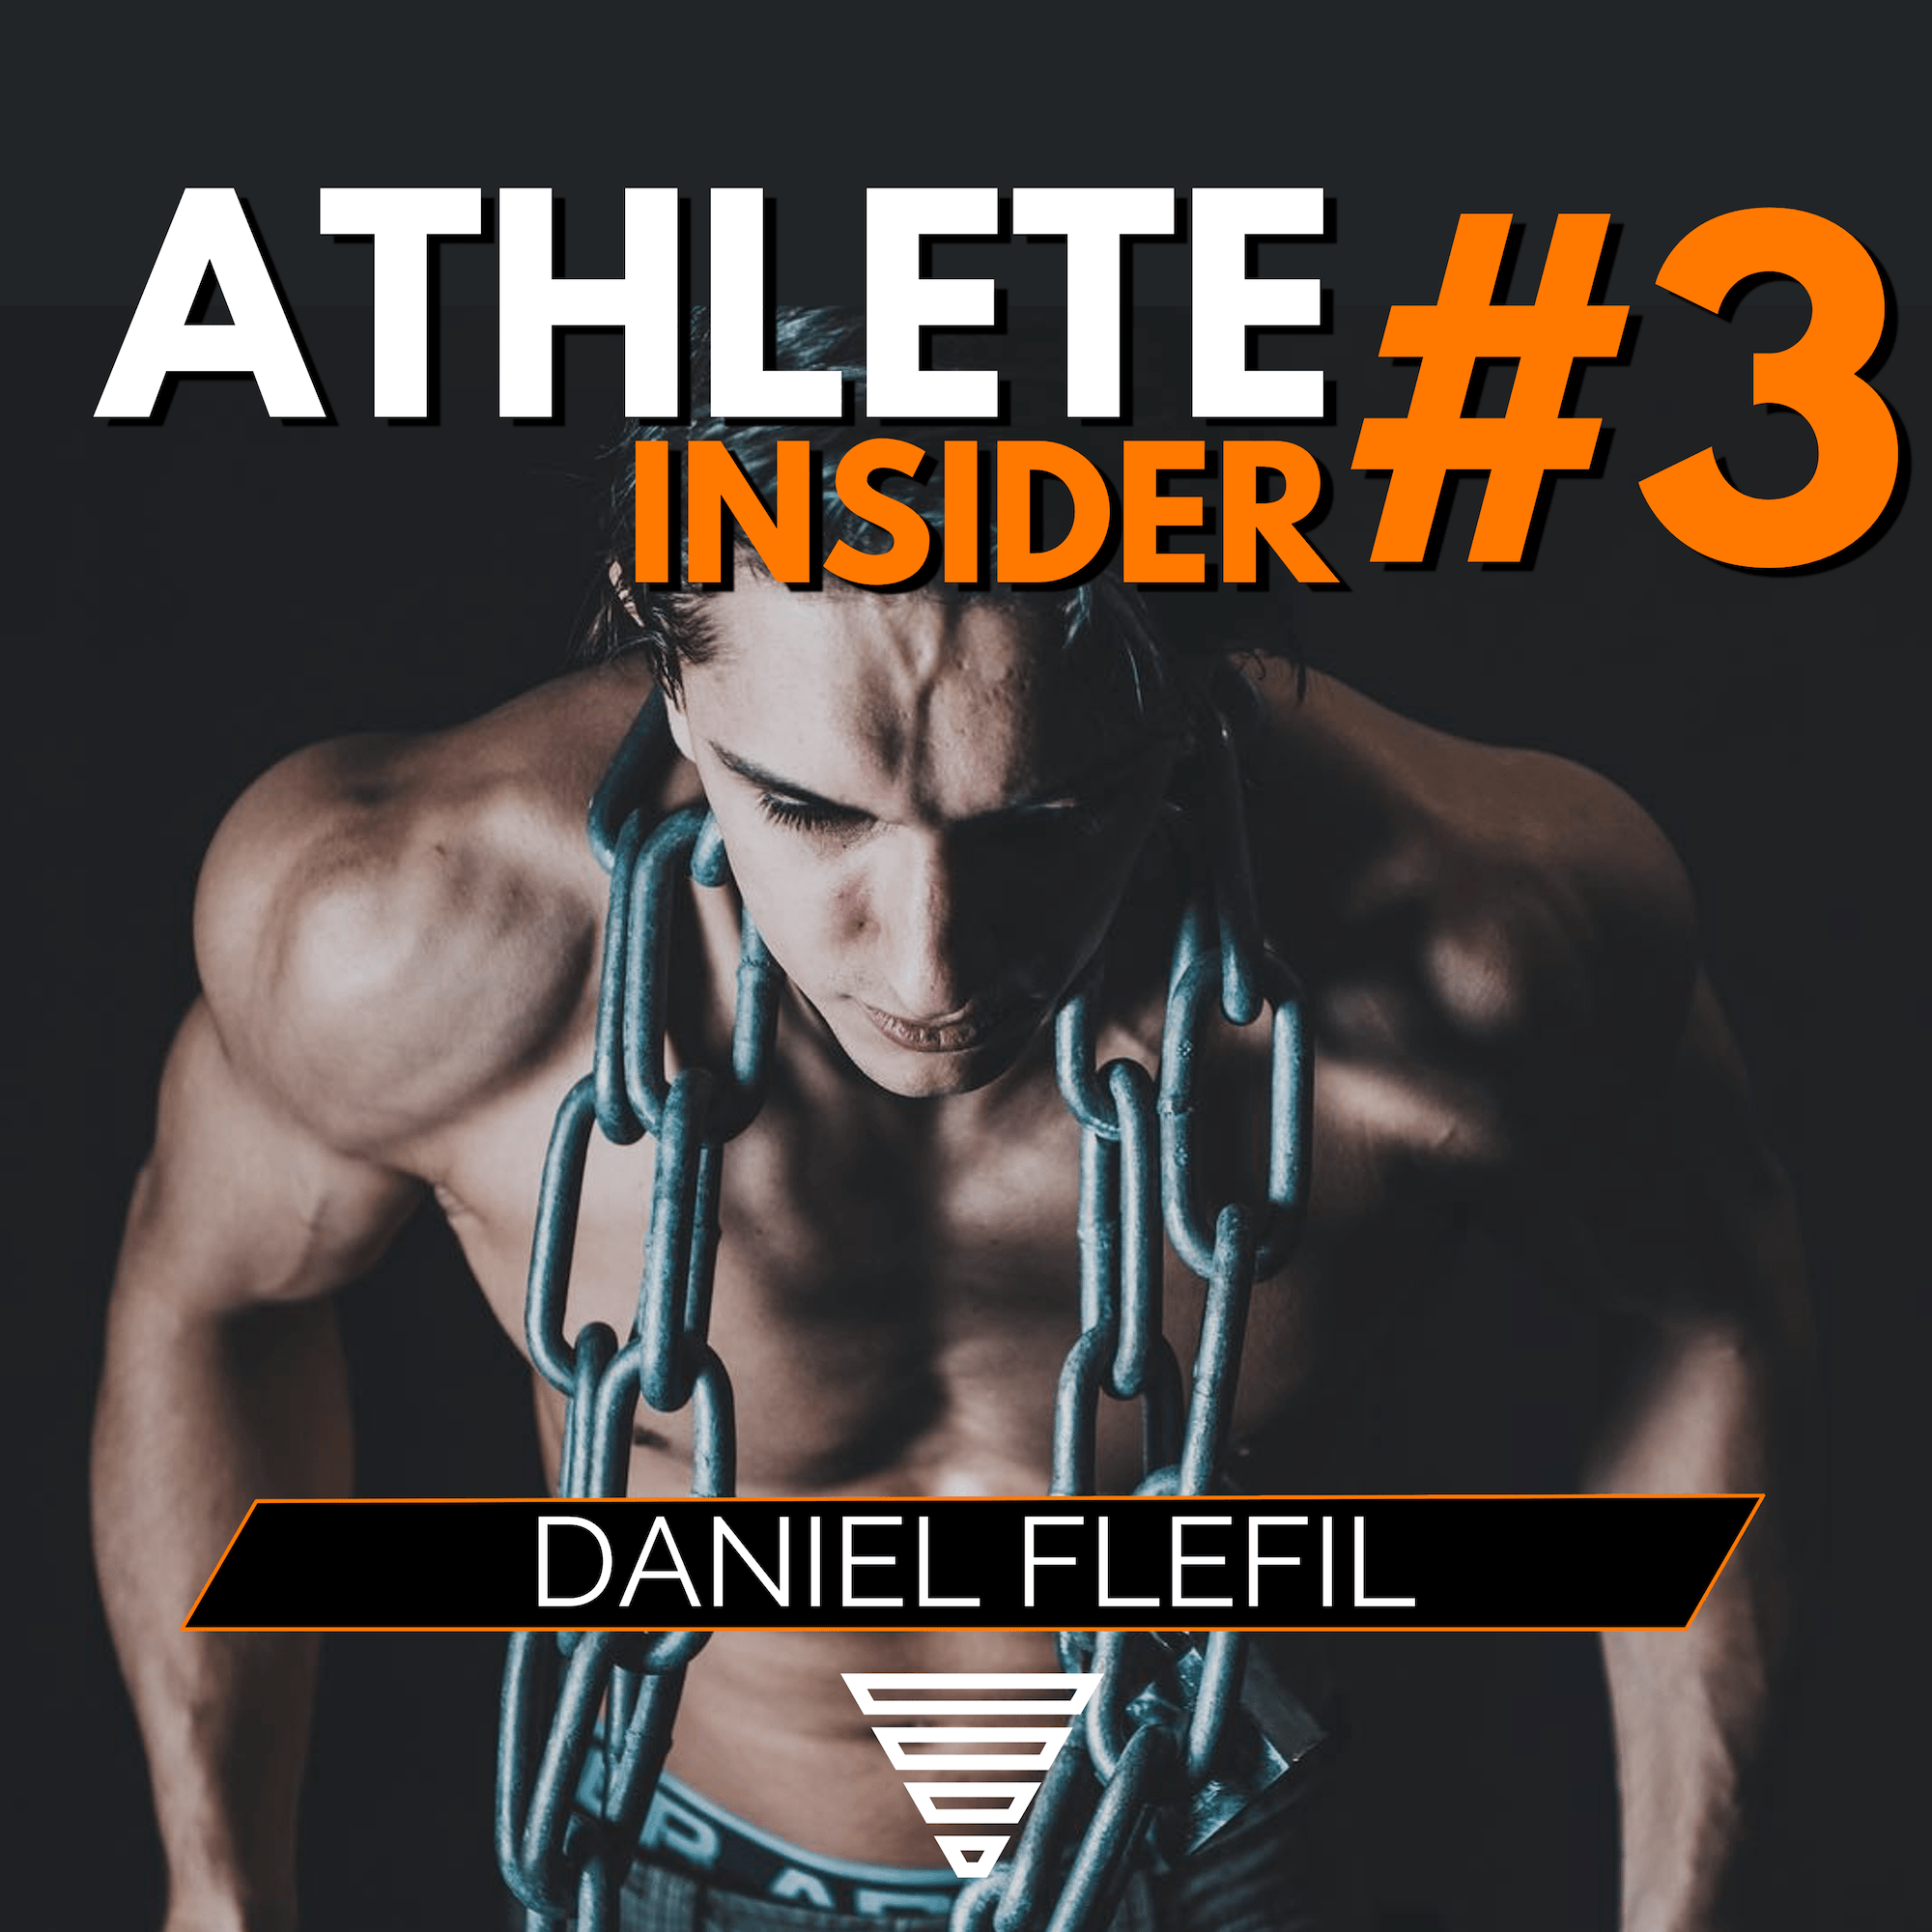 Become stronger through obstacles | The mindset of DANIEL FLEFIL | The Athlete Insider Podcast #3